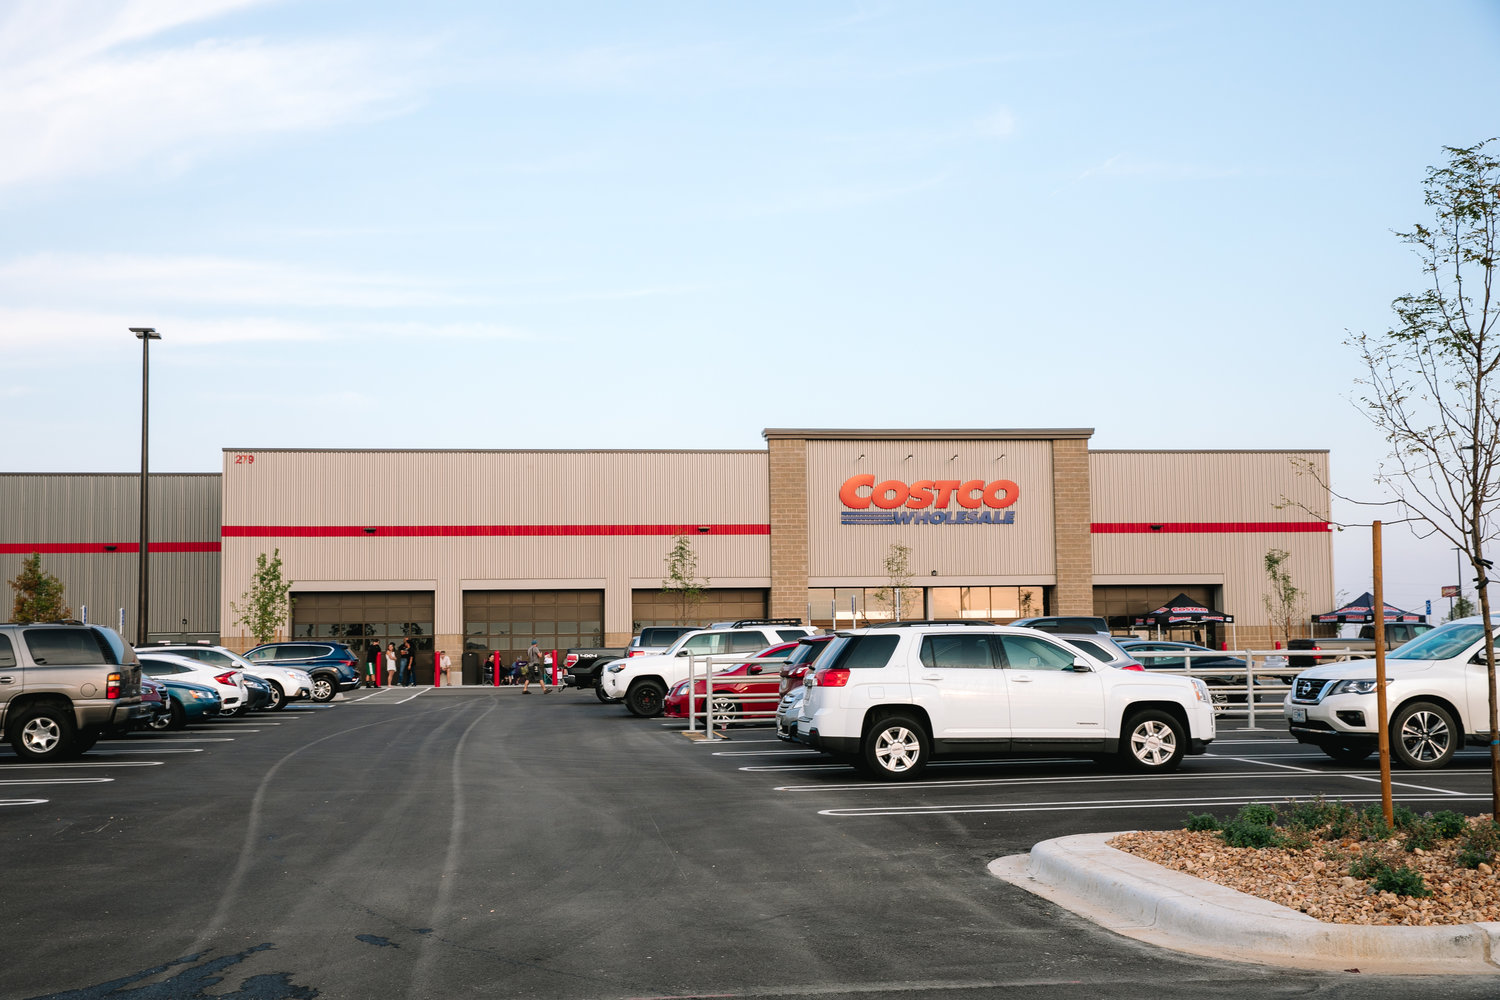 The 160,000-square-foot store is the seventh in Missouri.